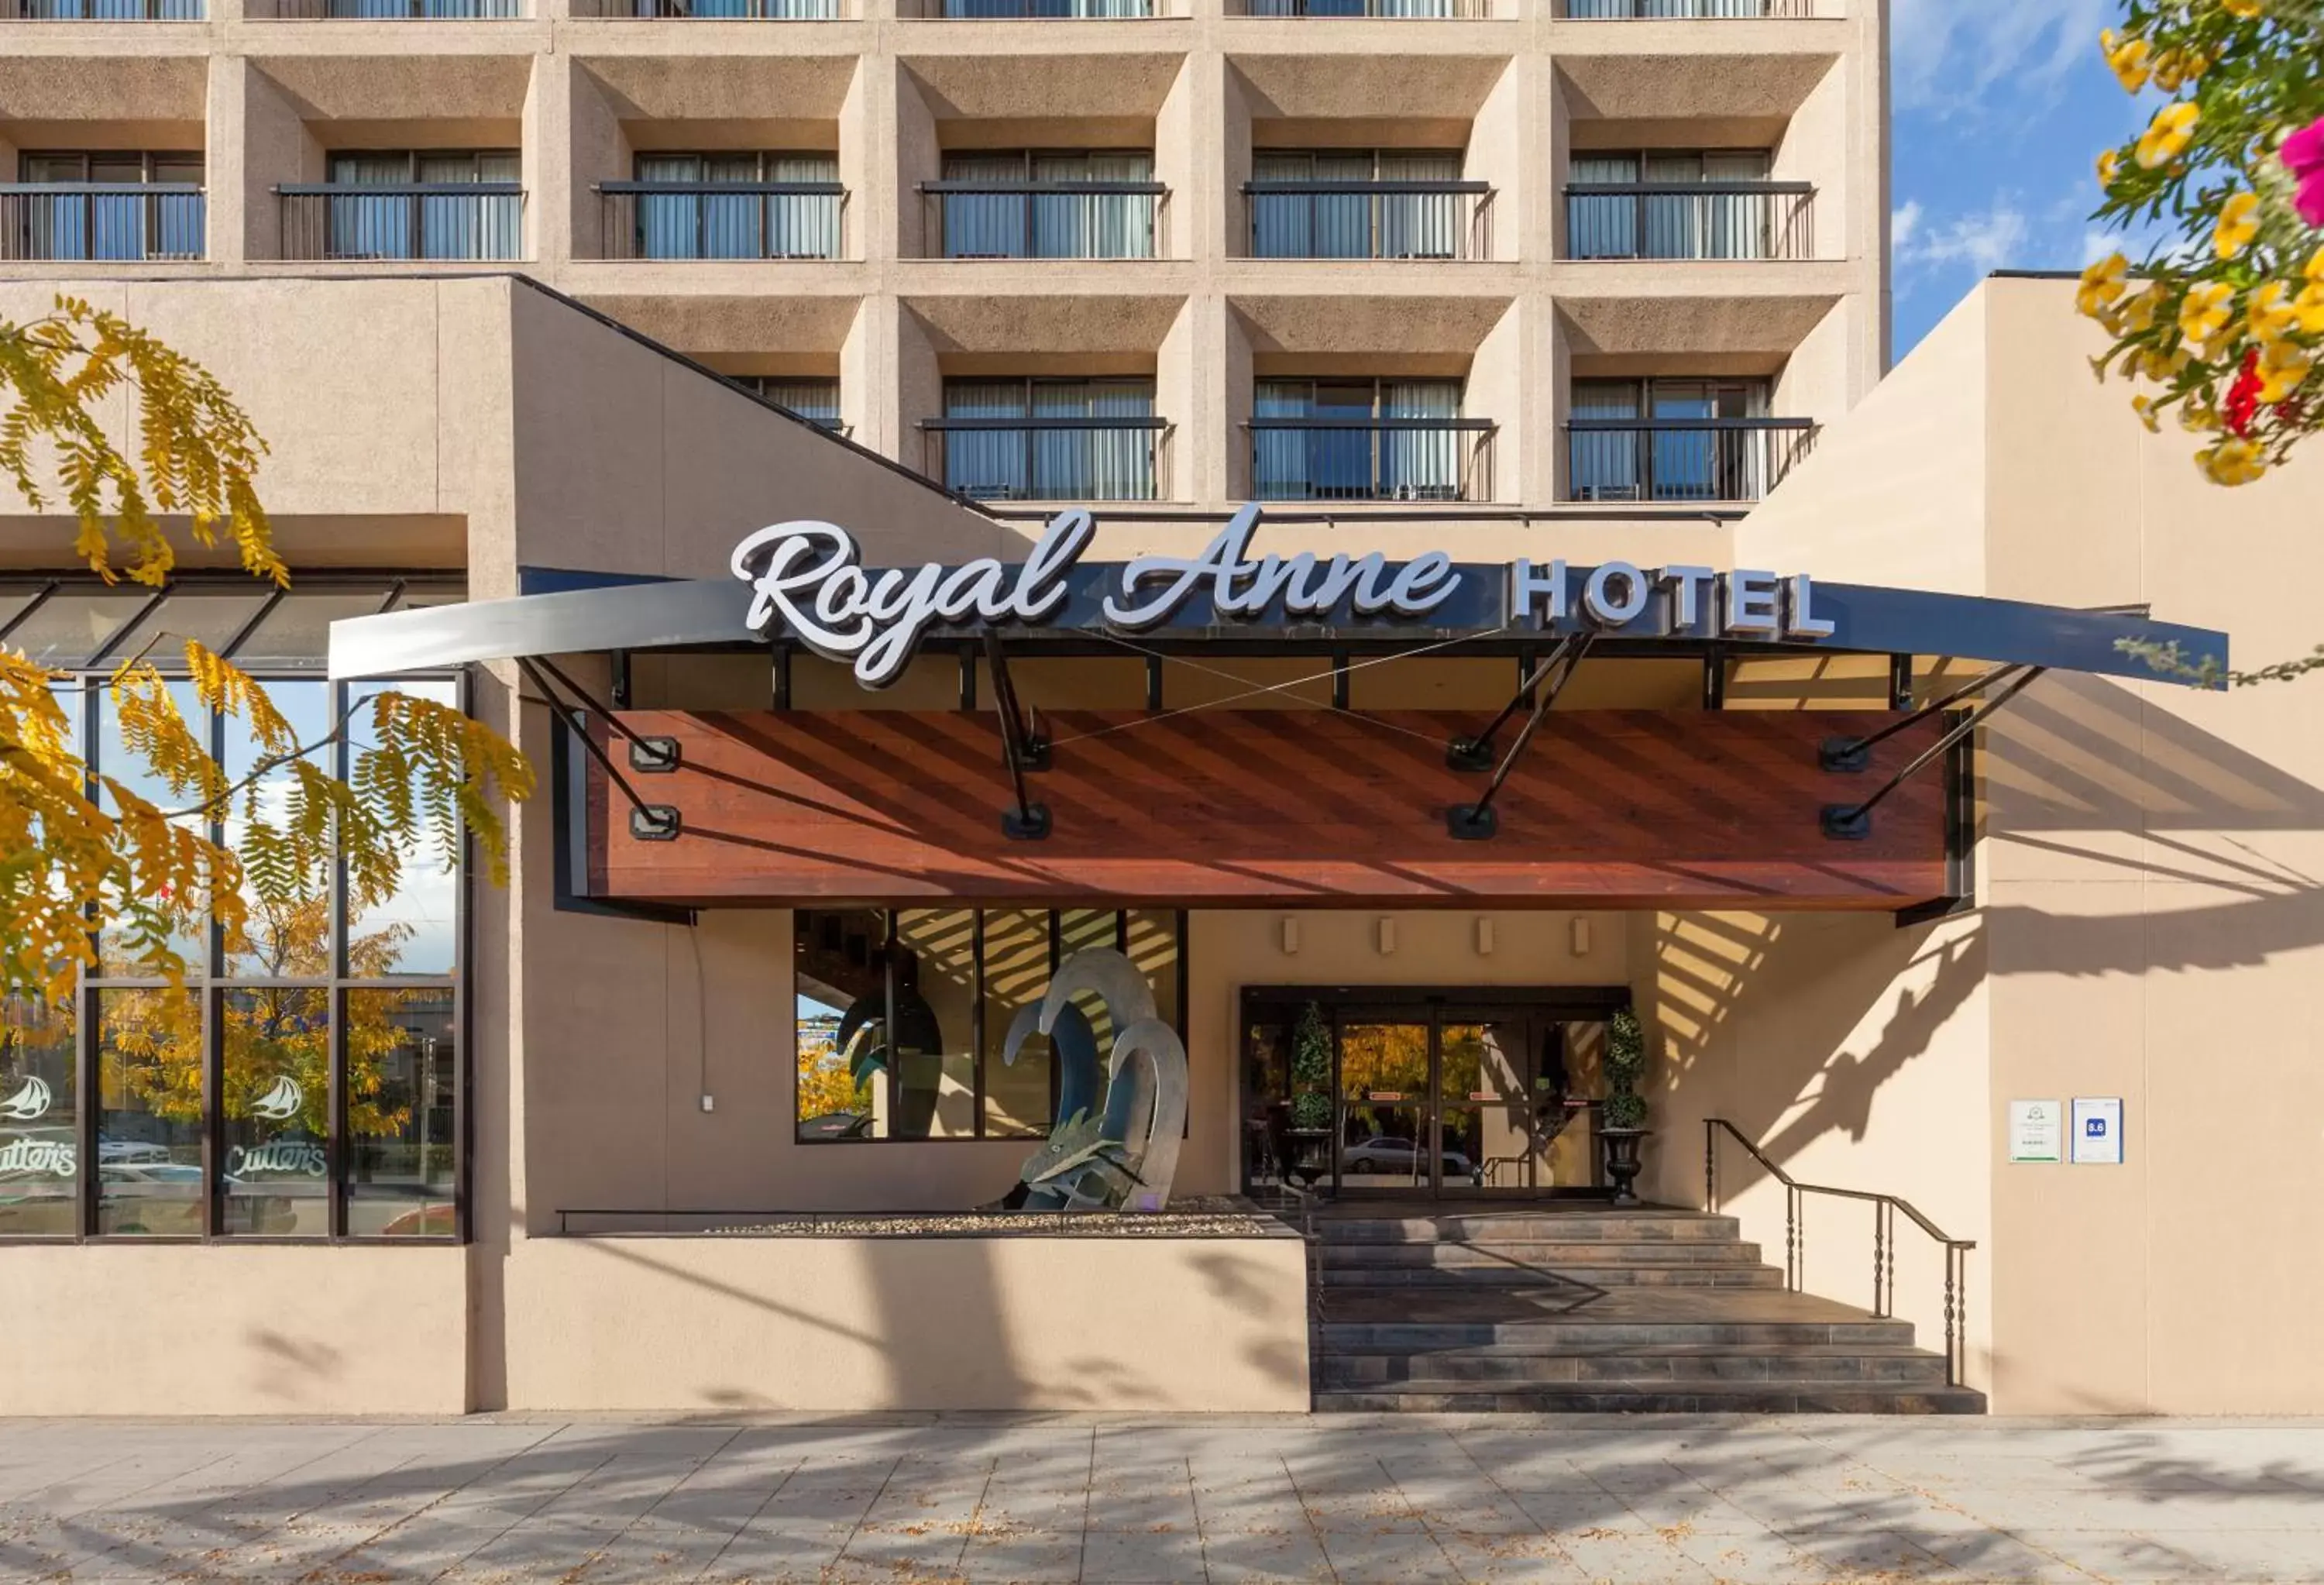 Facade/entrance in The Royal Anne Hotel